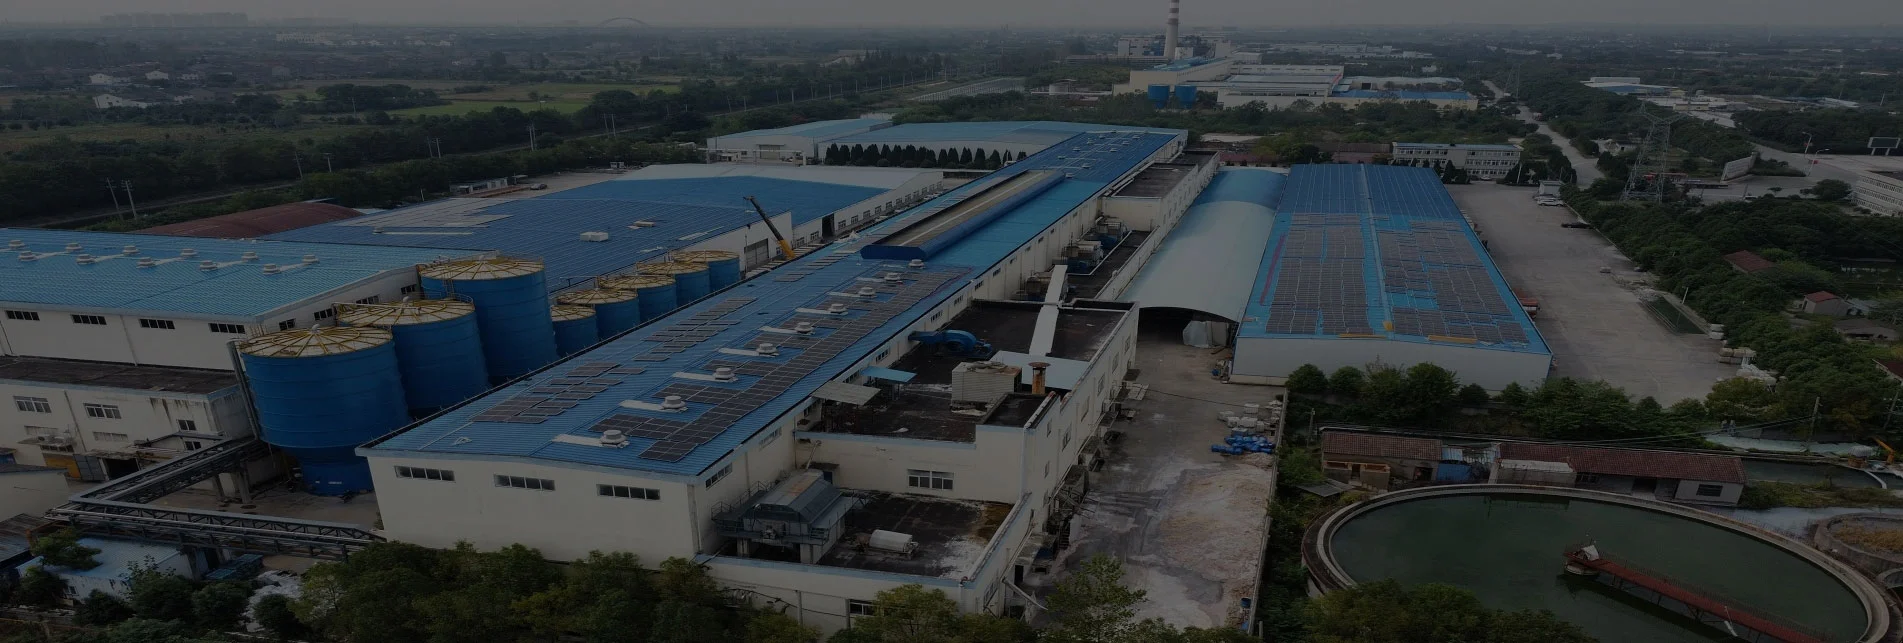 Golden Paper Group Products Factory